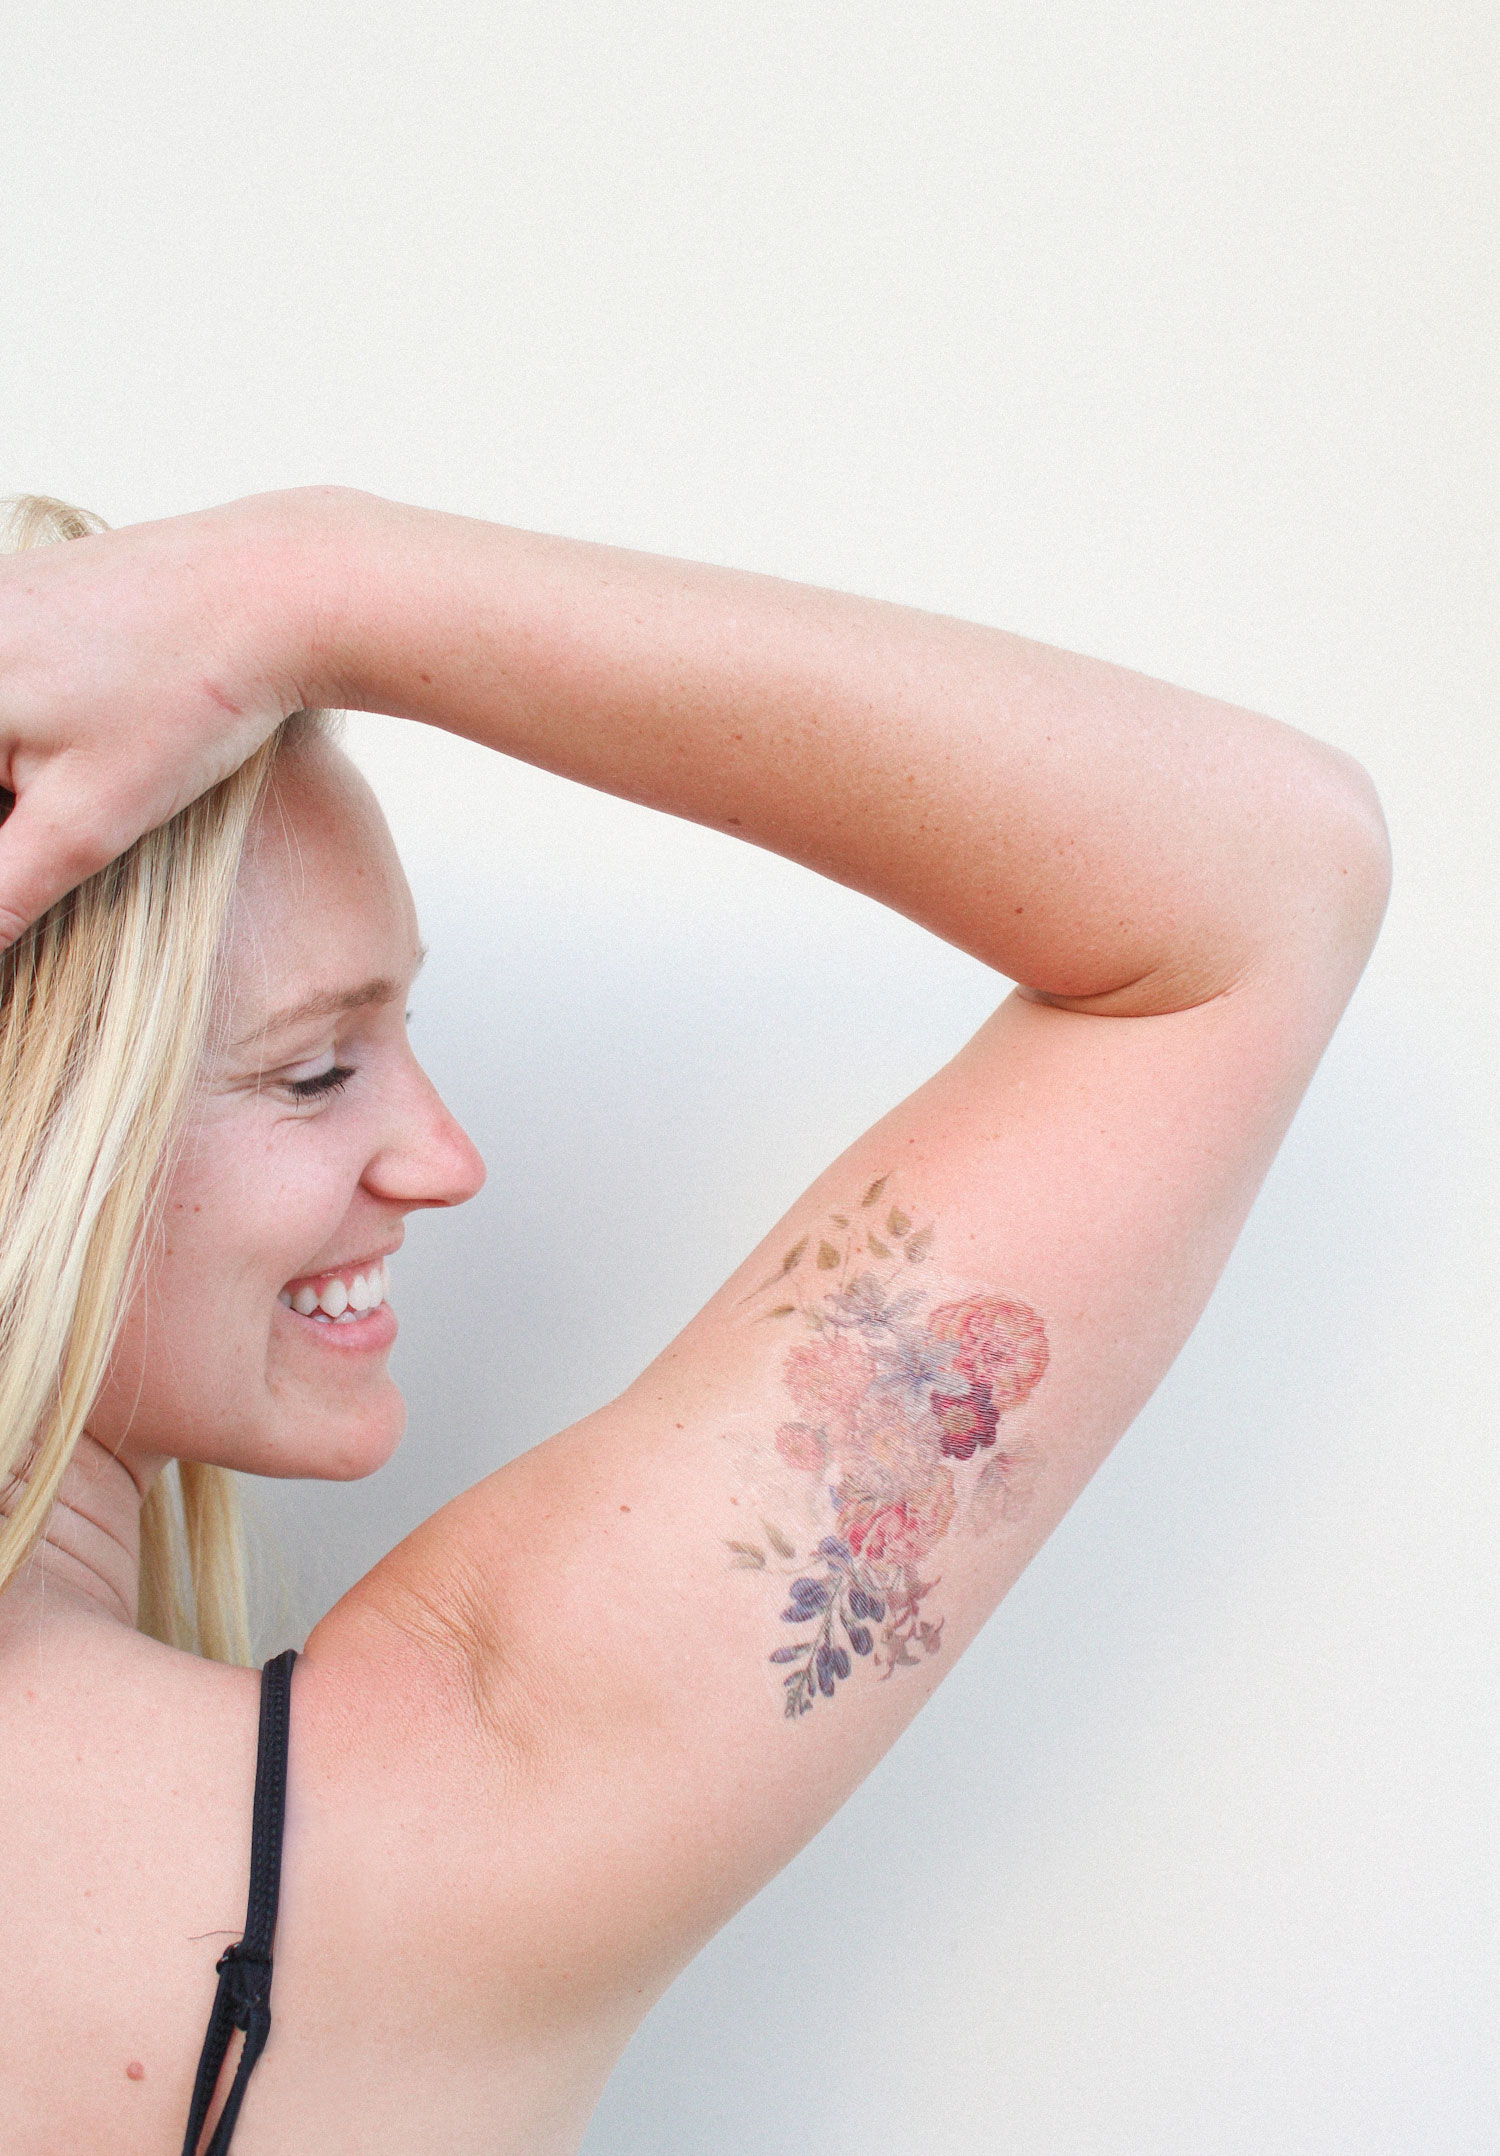 How To, How Hard, and How Much: Want a DIY Temporary Tattoo? Here's One  Wrong Way and One Right Way